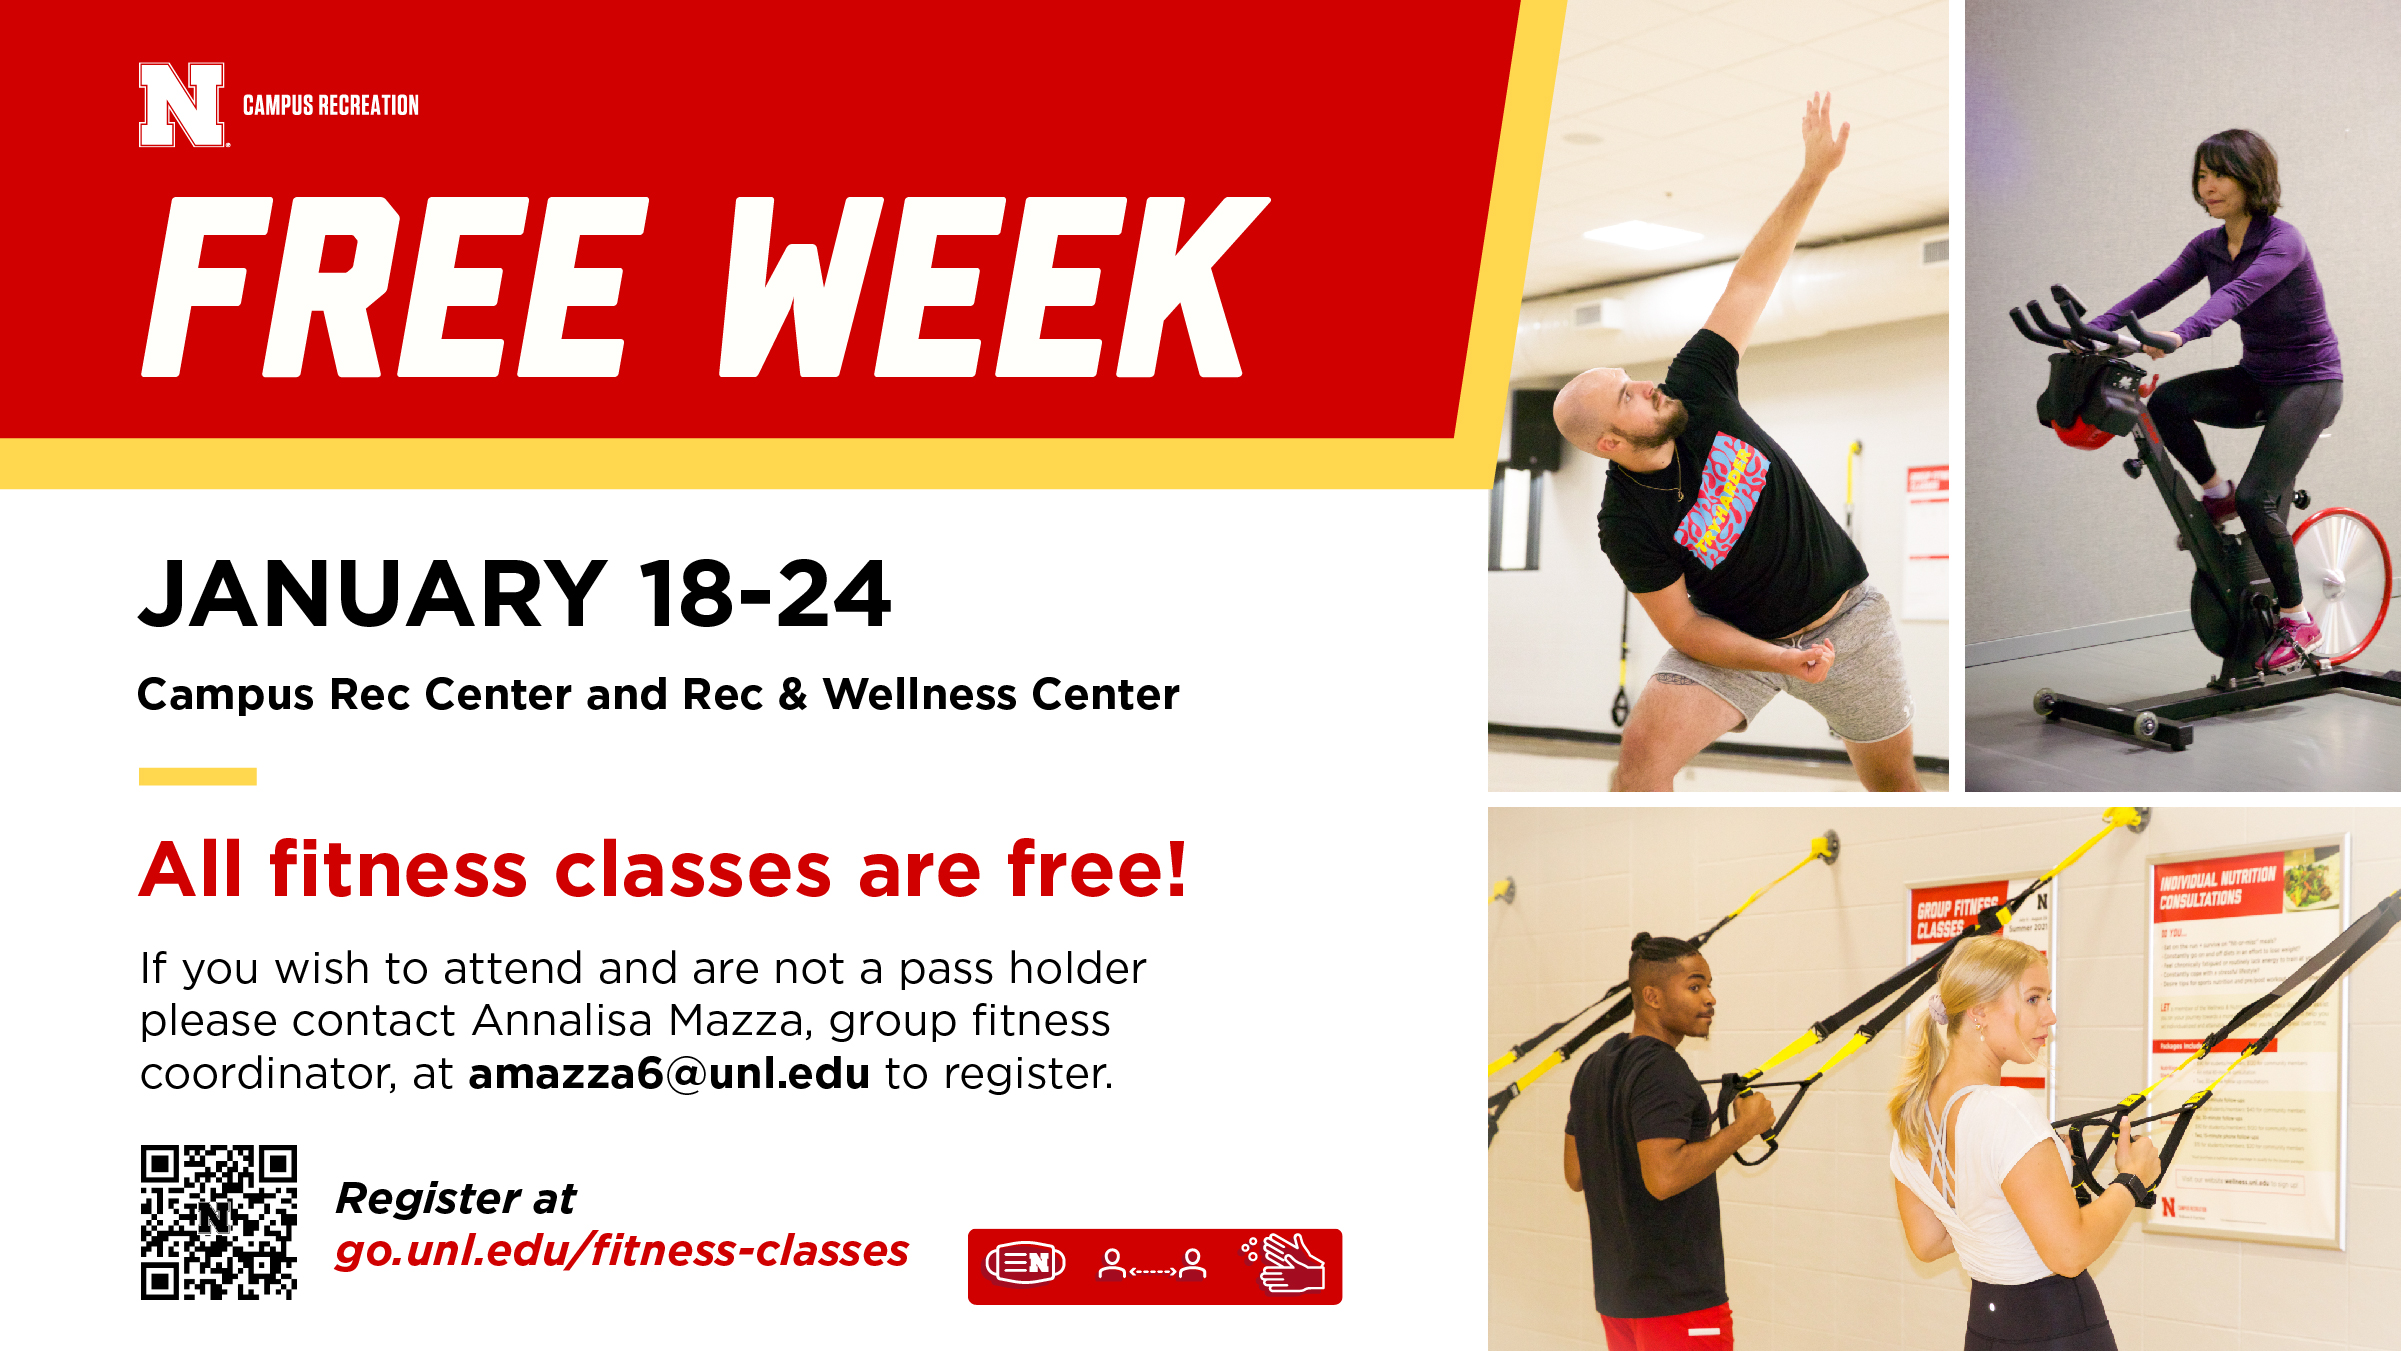 A free week of fitness classes is being offered Jan. 18-24 at the Campus Recreation Center and Recreation & Wellness Center.